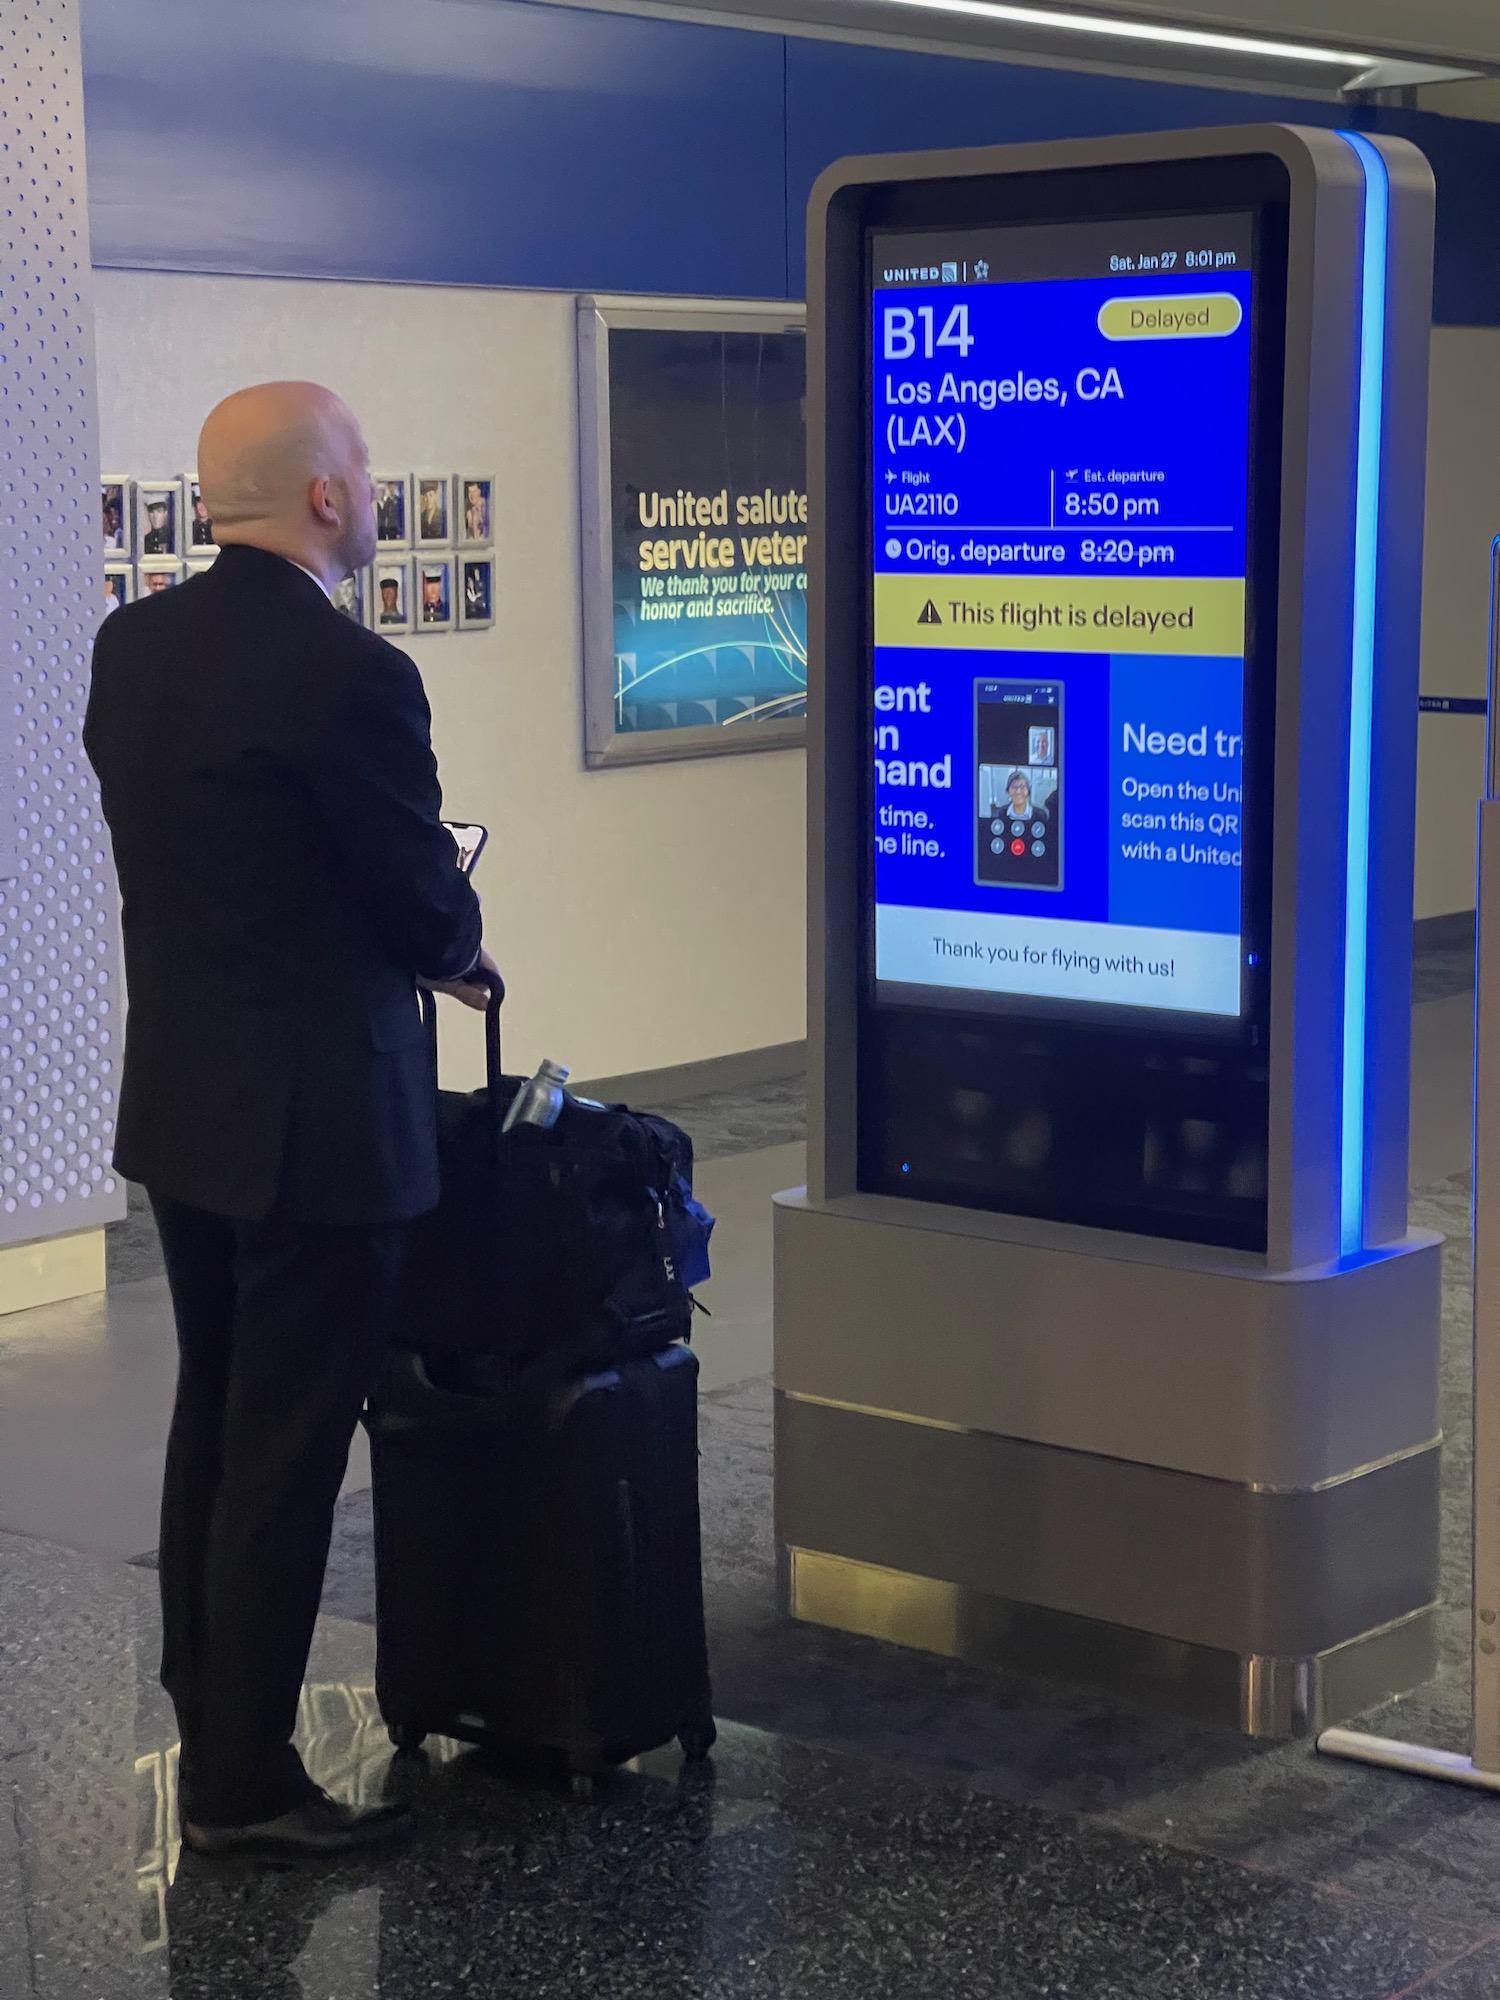 a man in a suit with luggage in front of a digital display